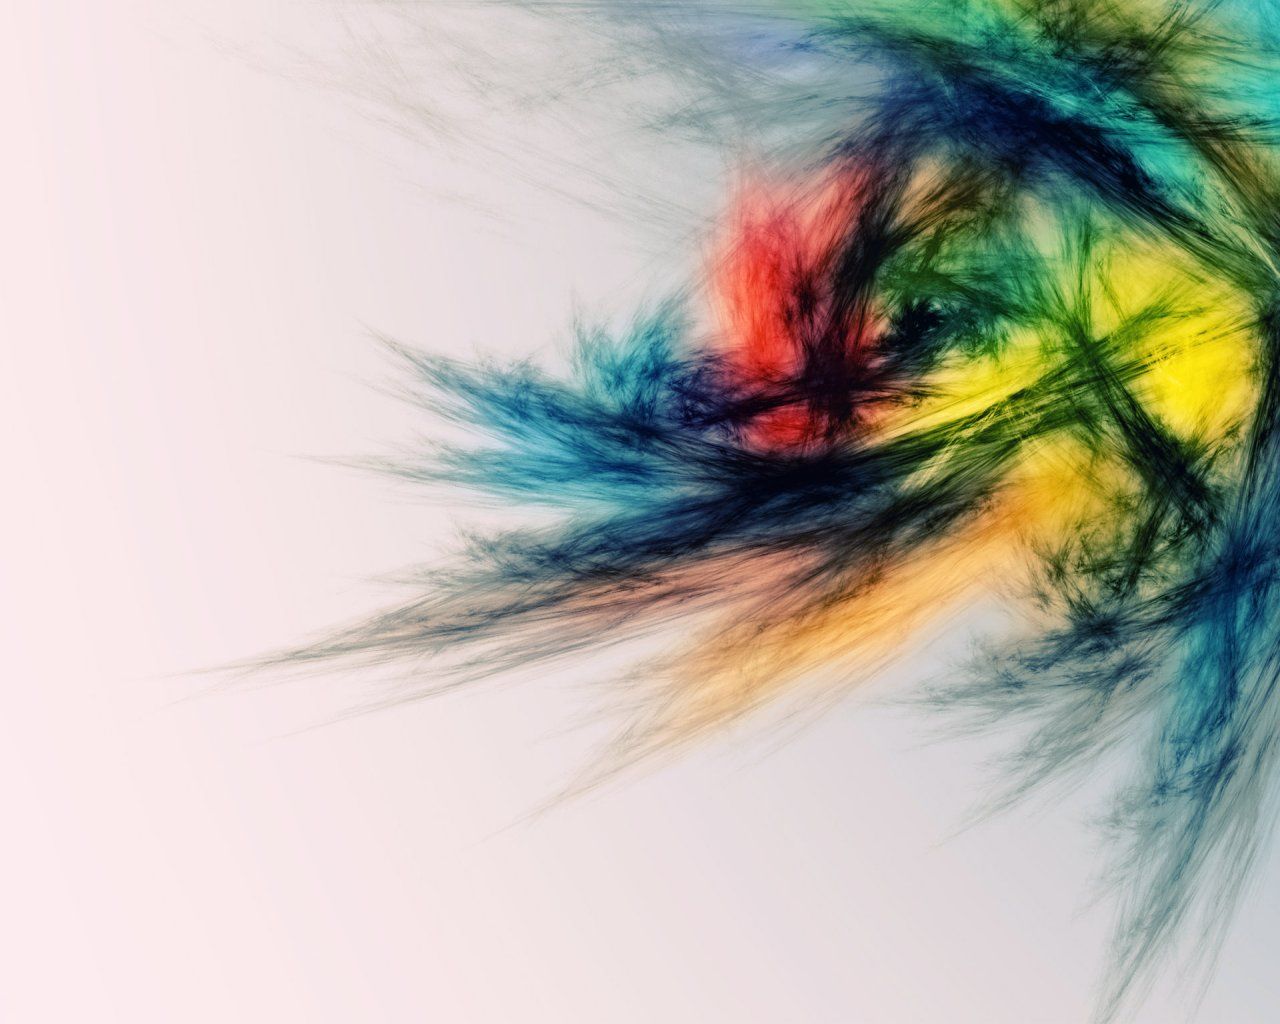 Imaginary Colors - HD Wallpapers Widescreen - 1280x1024